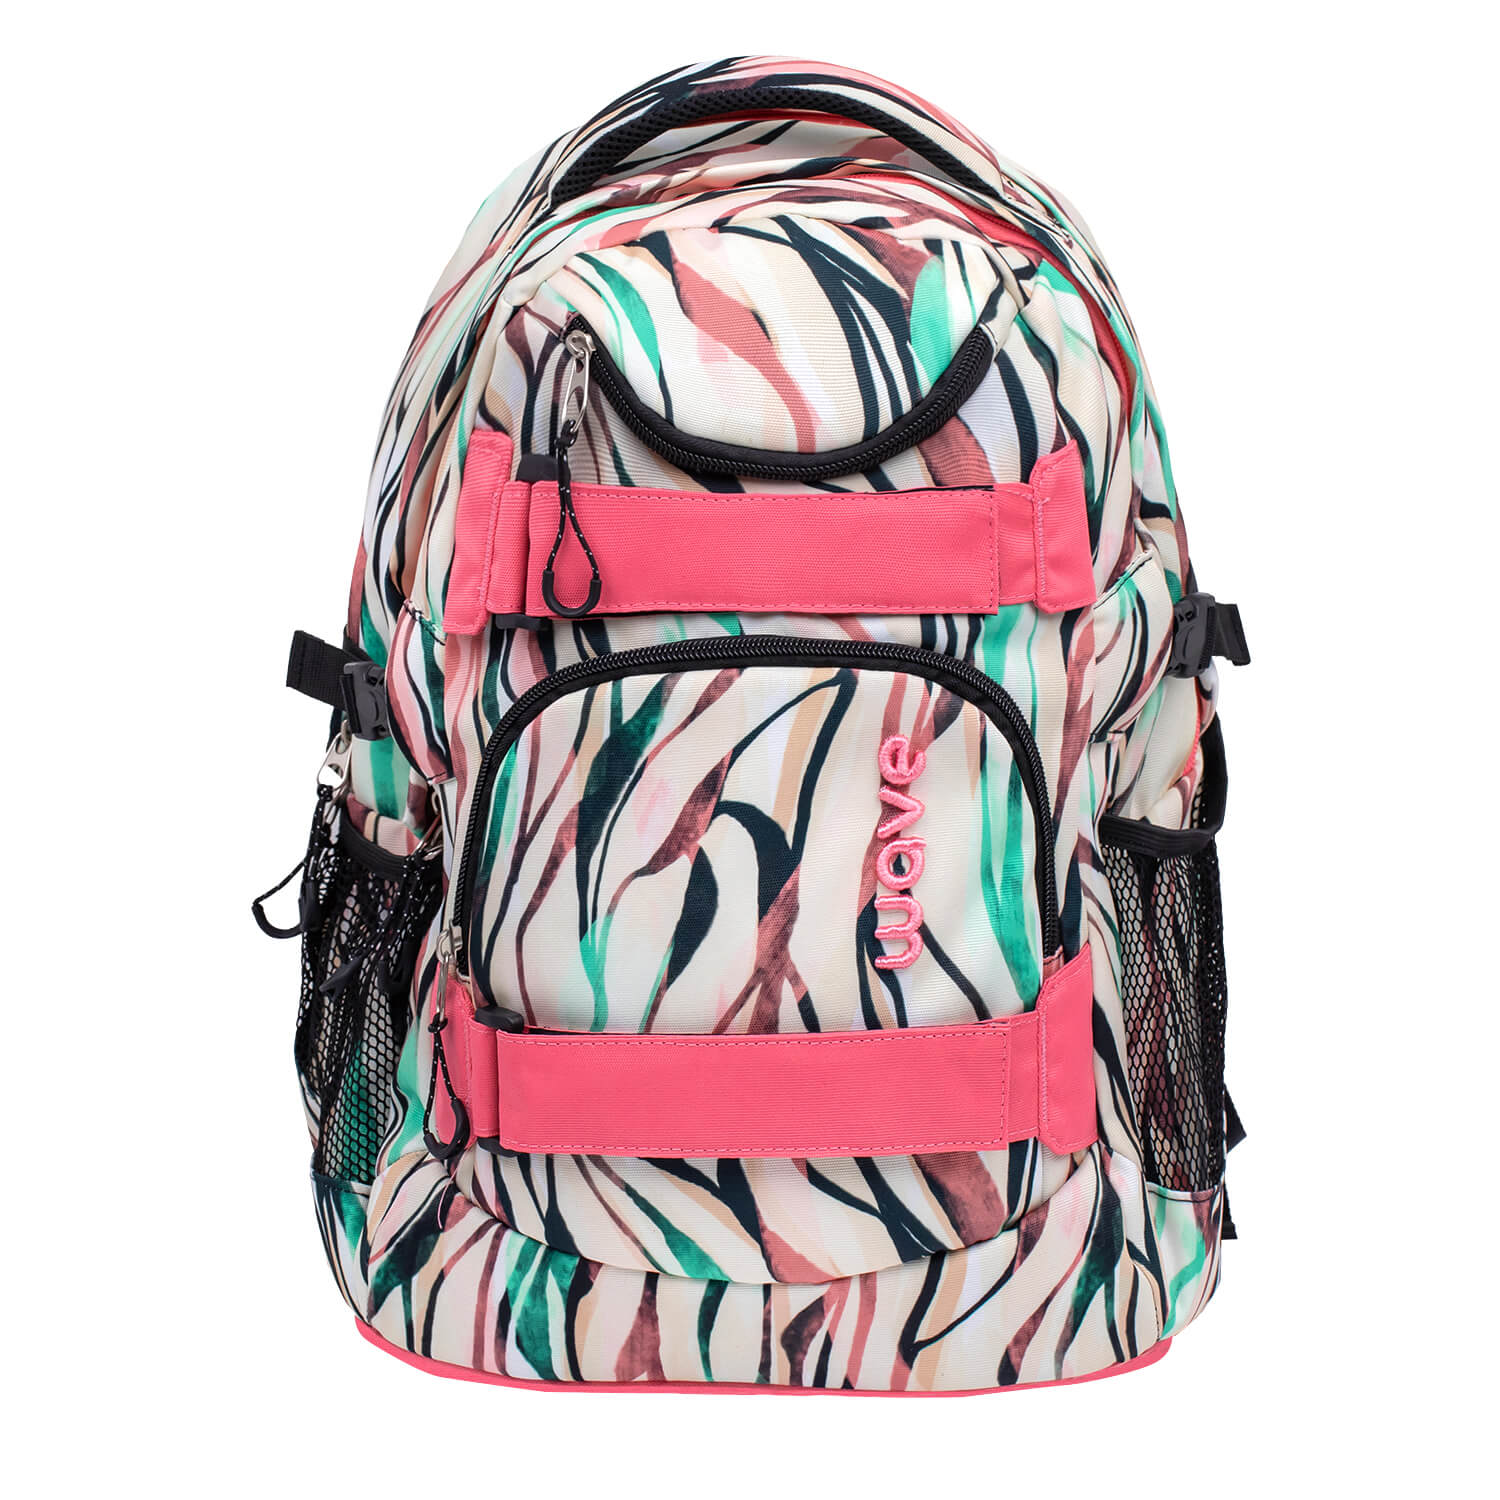 Wave Infinity Feathers school backpack Set 3 Pcs